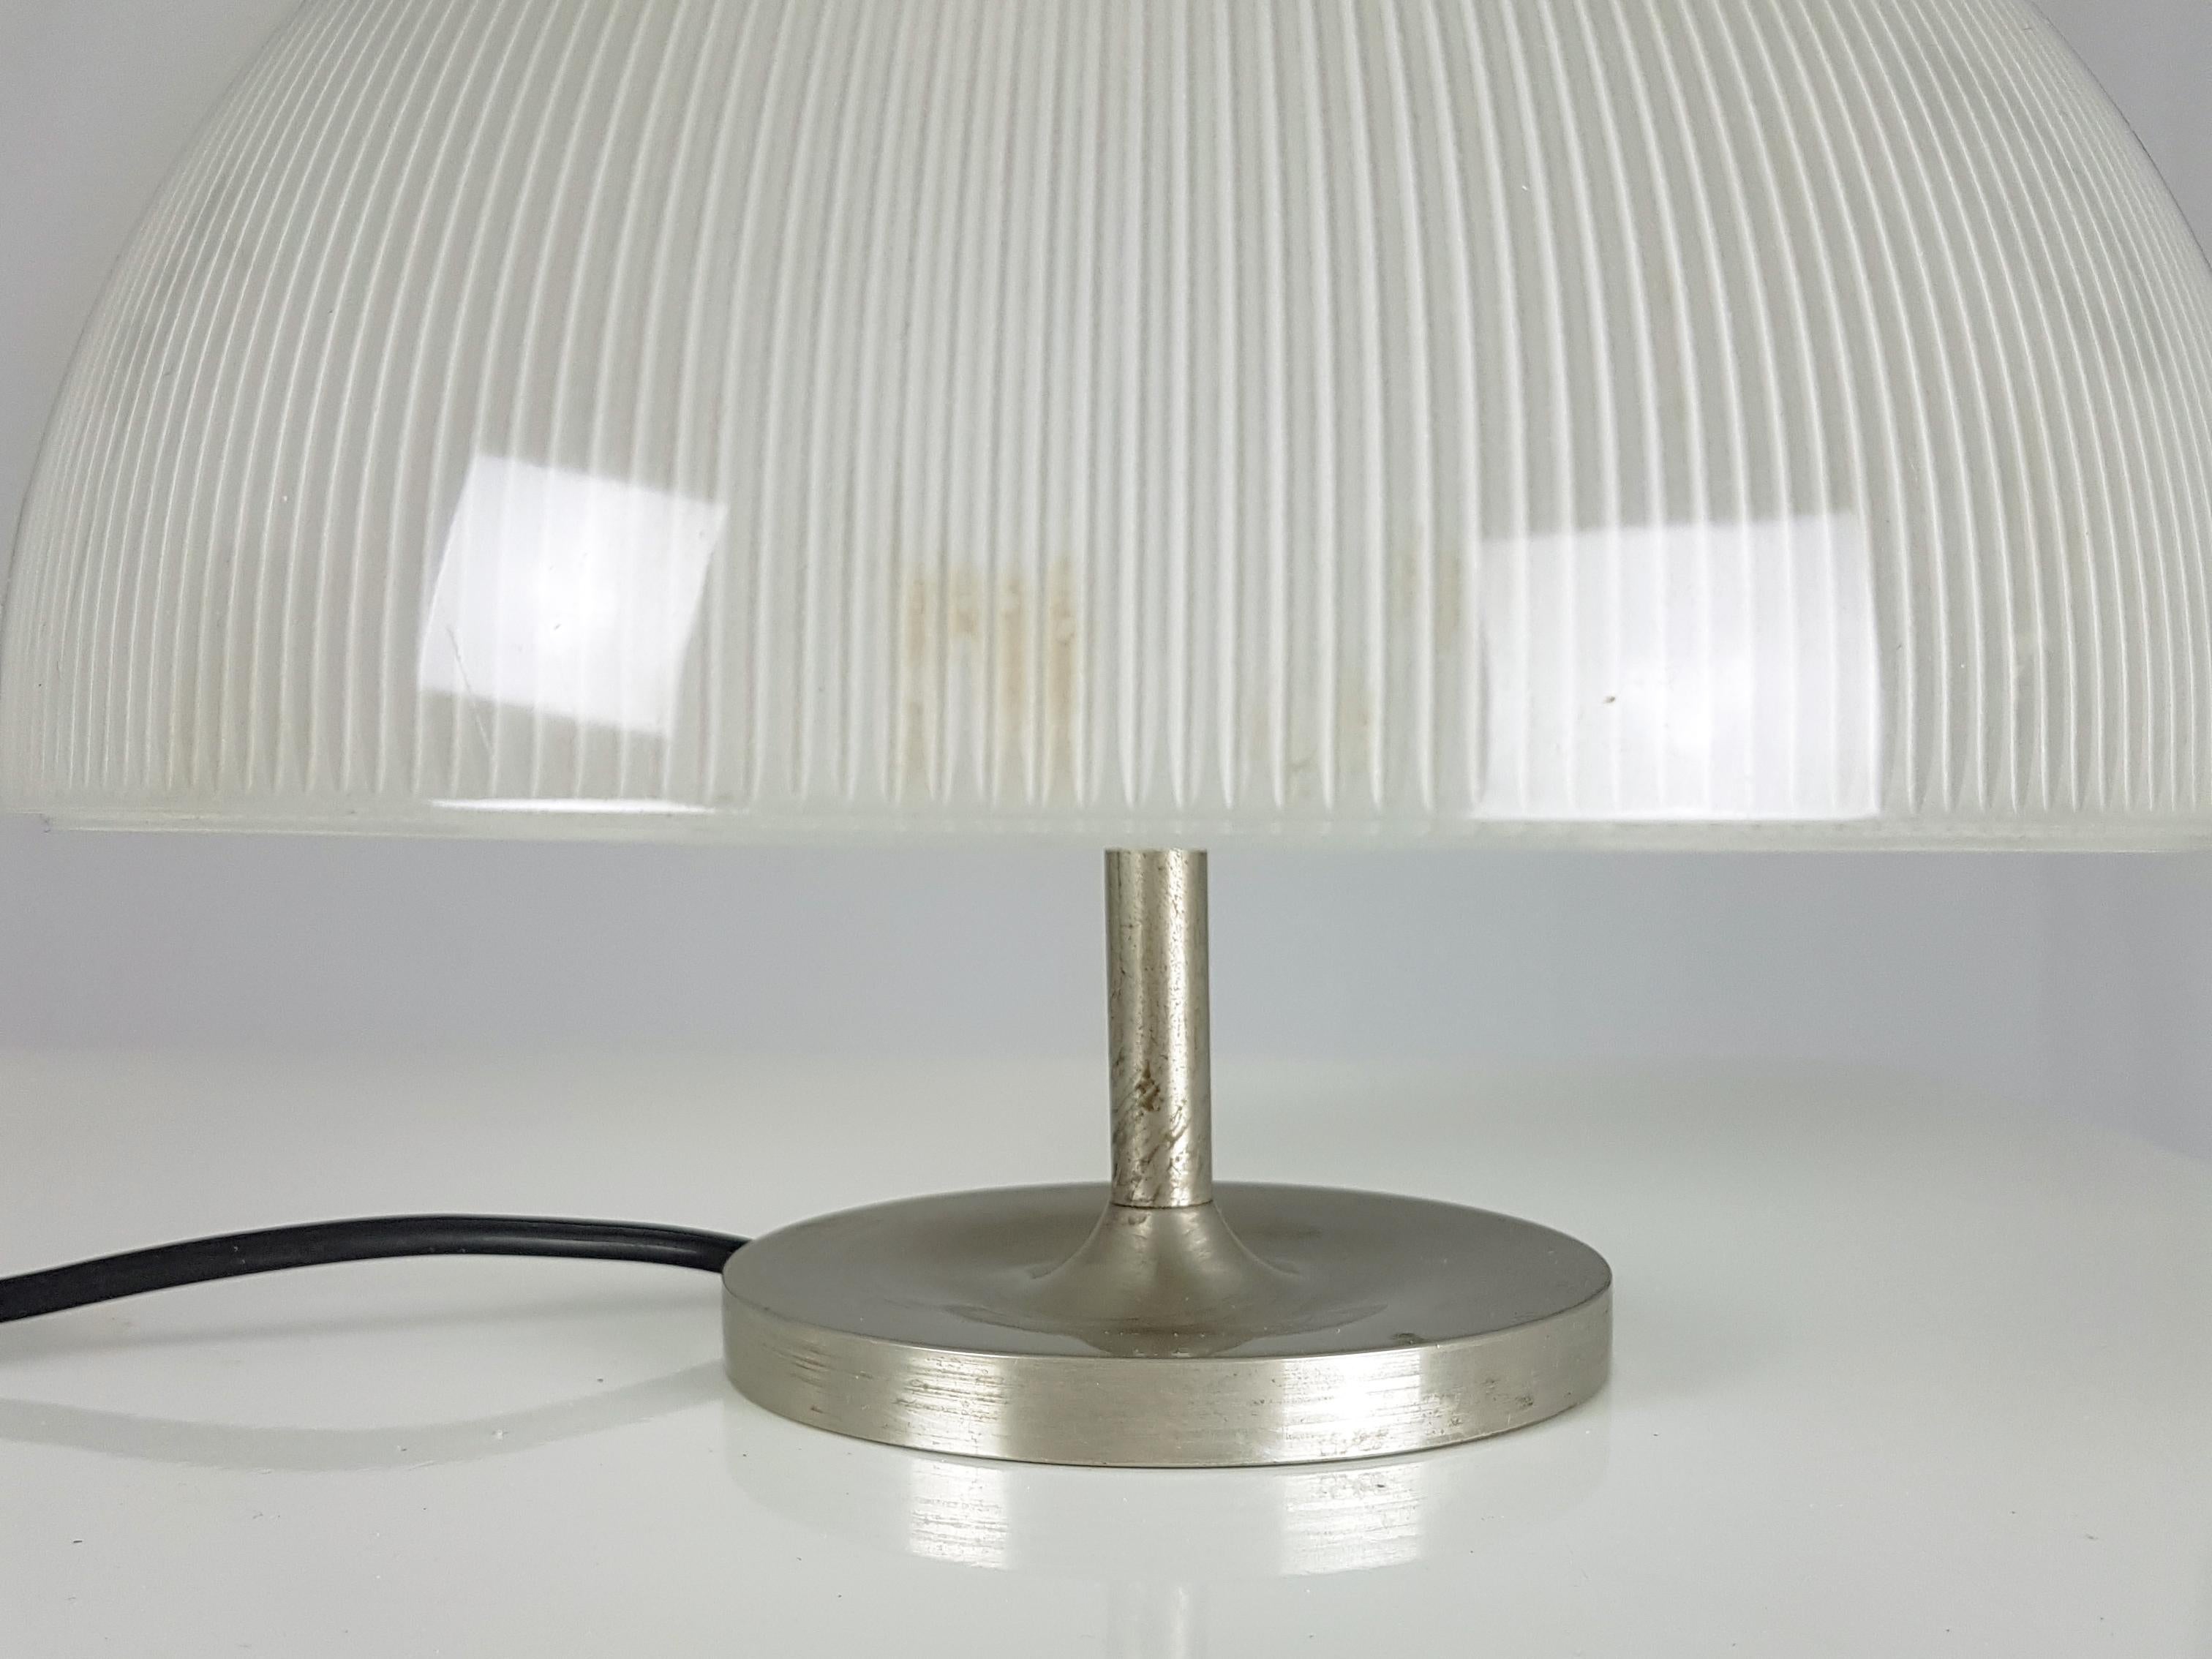 Space Age Molded Glass & Nickel Plated 1960s Alfetta Table Lamp by S. Mazza for Artemide